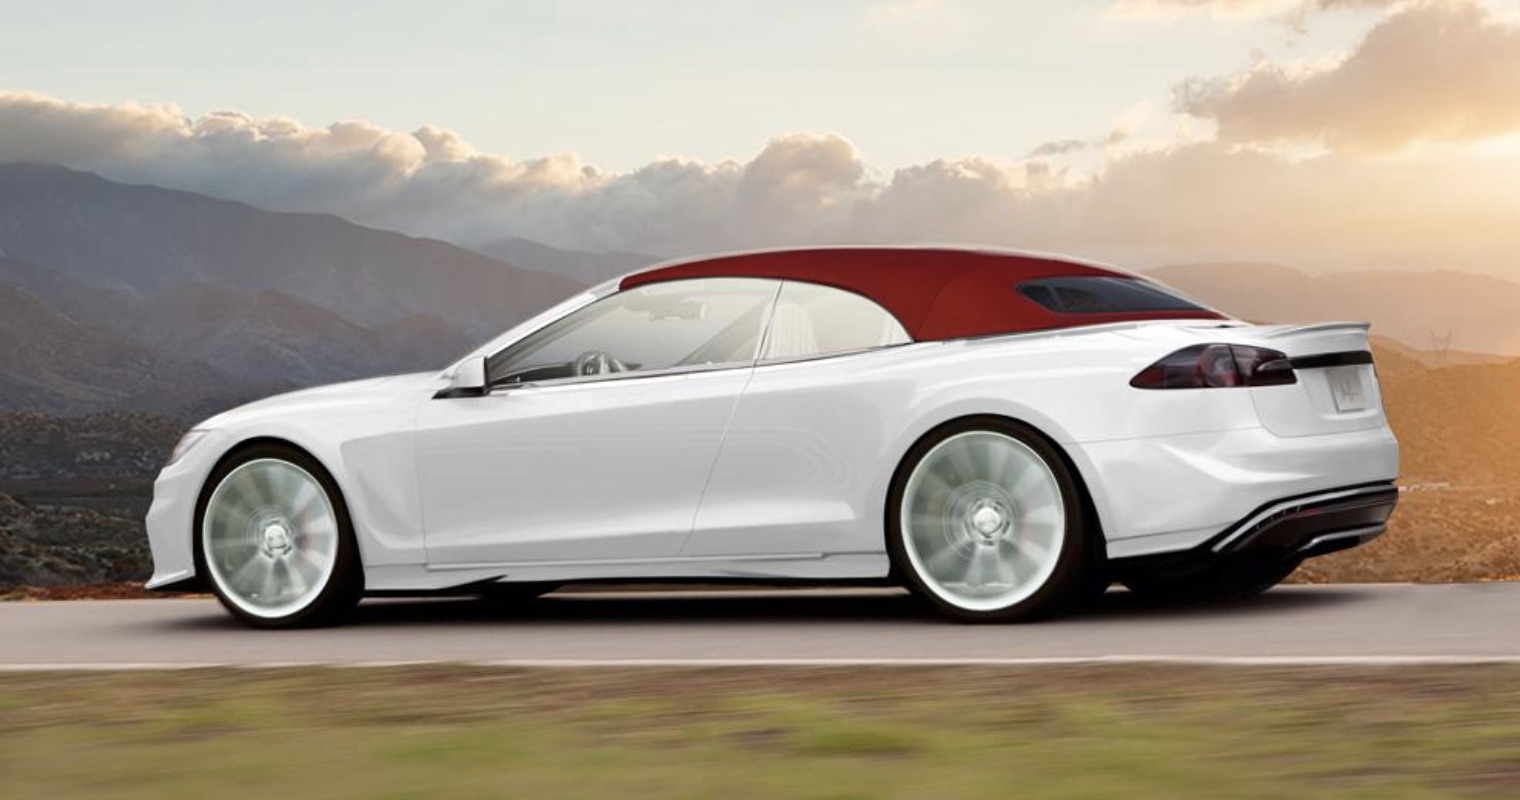 Ares previews stylish Tesla Model S